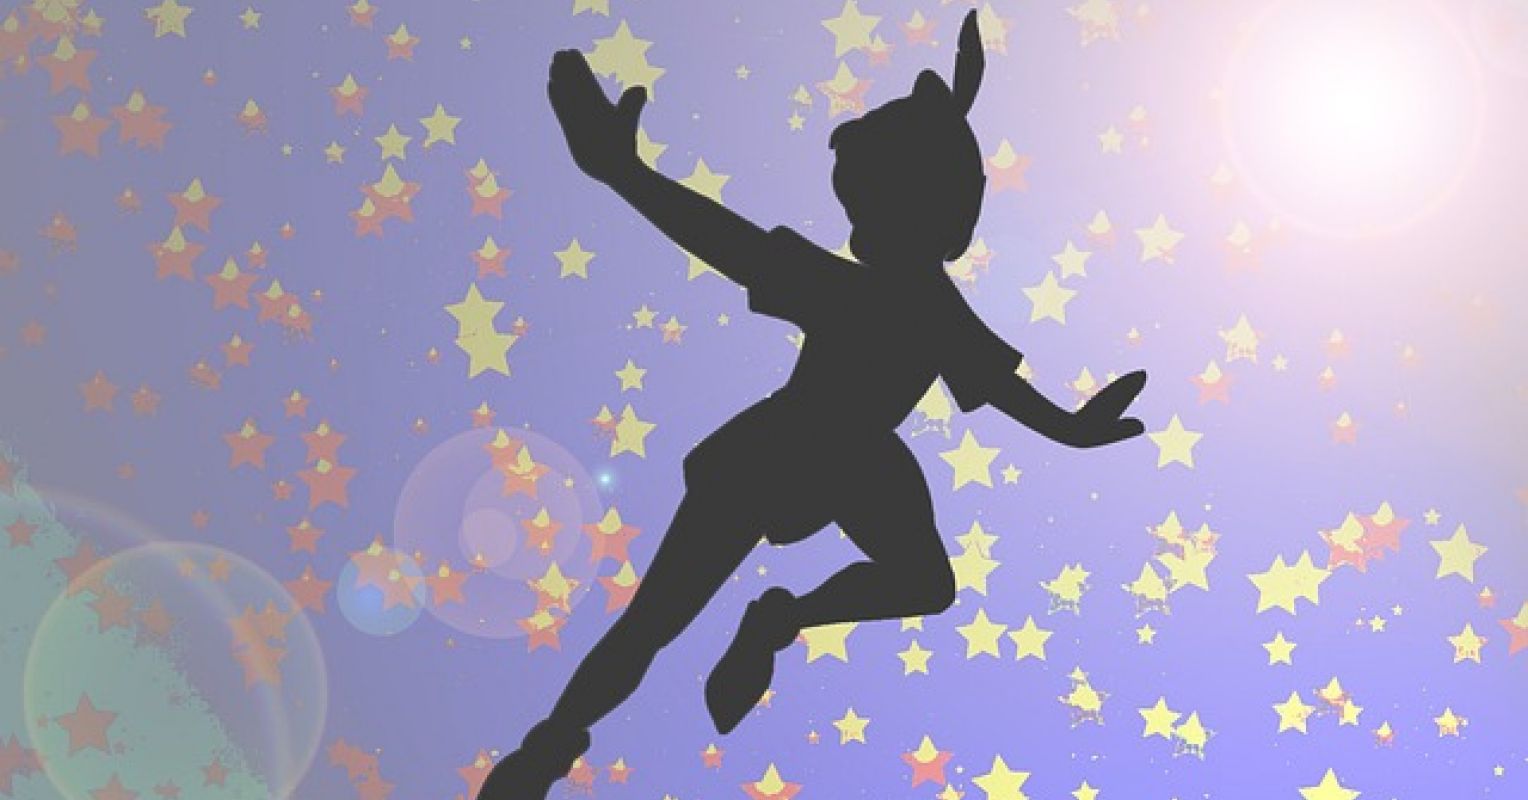 The Peter Pan Syndrome | Psychology Today